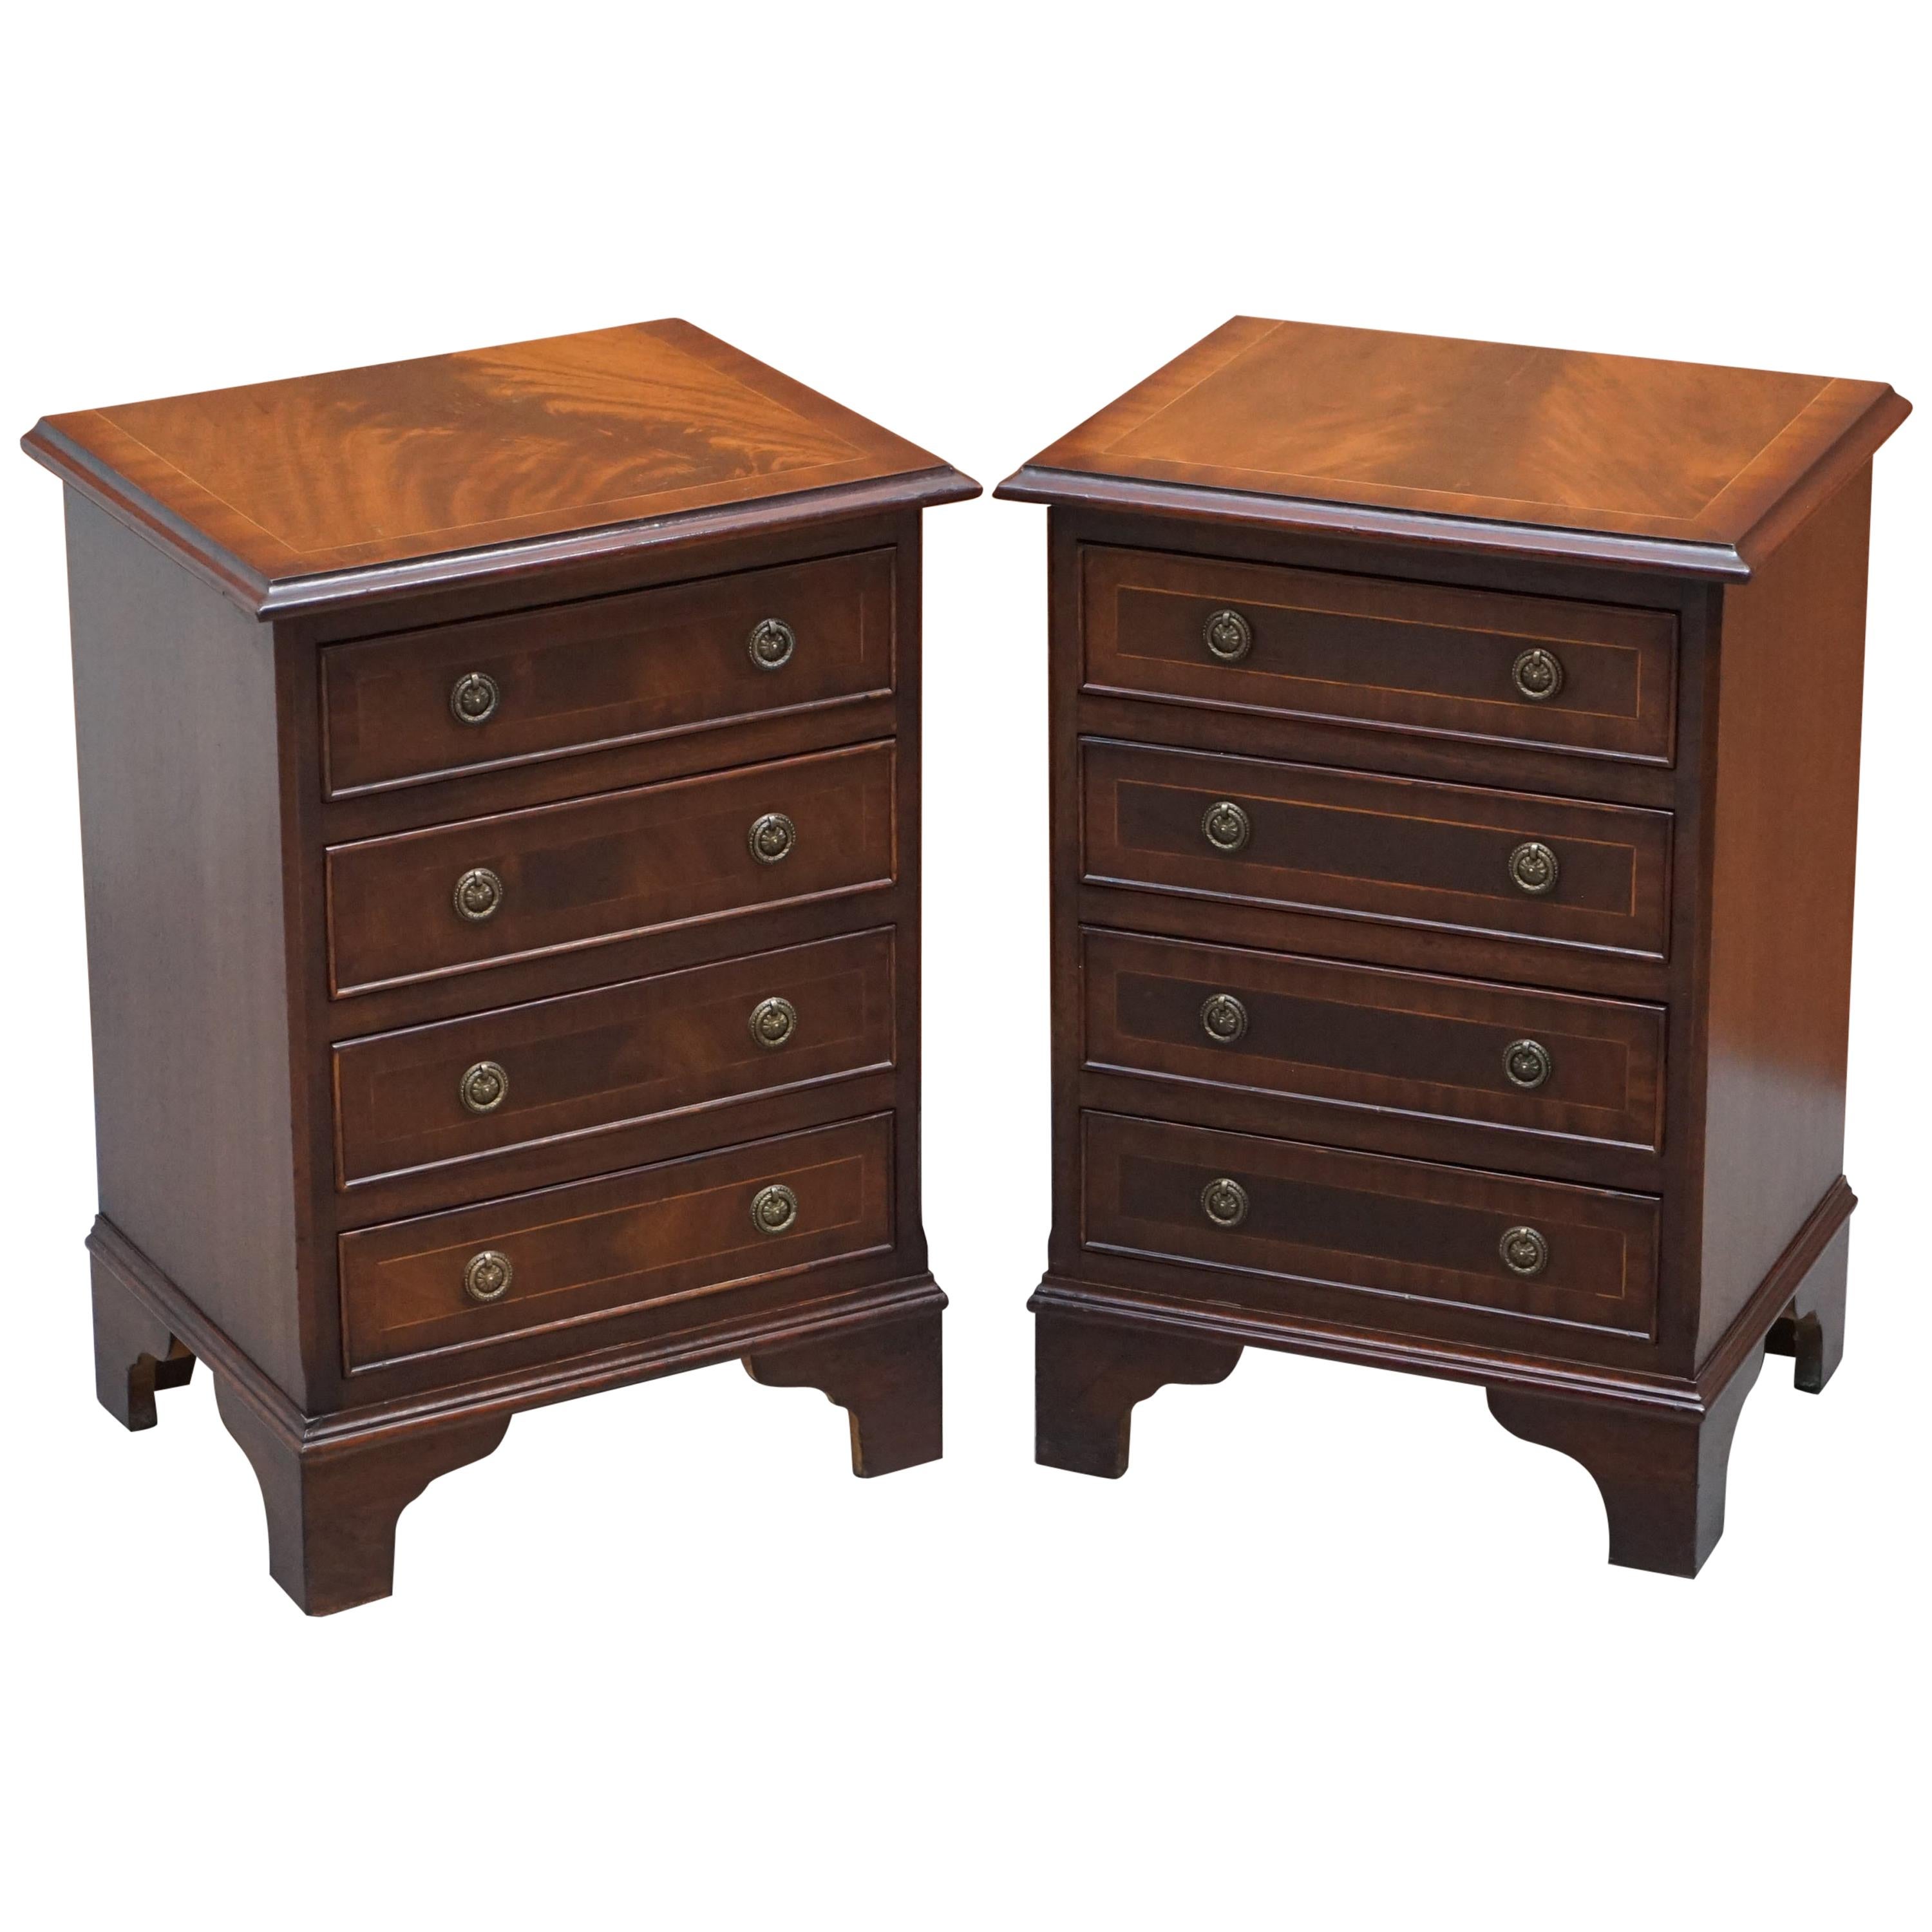 Pair of Flamed Mahogany Bedside Lamp Wine End Table Sized Chest of Drawers